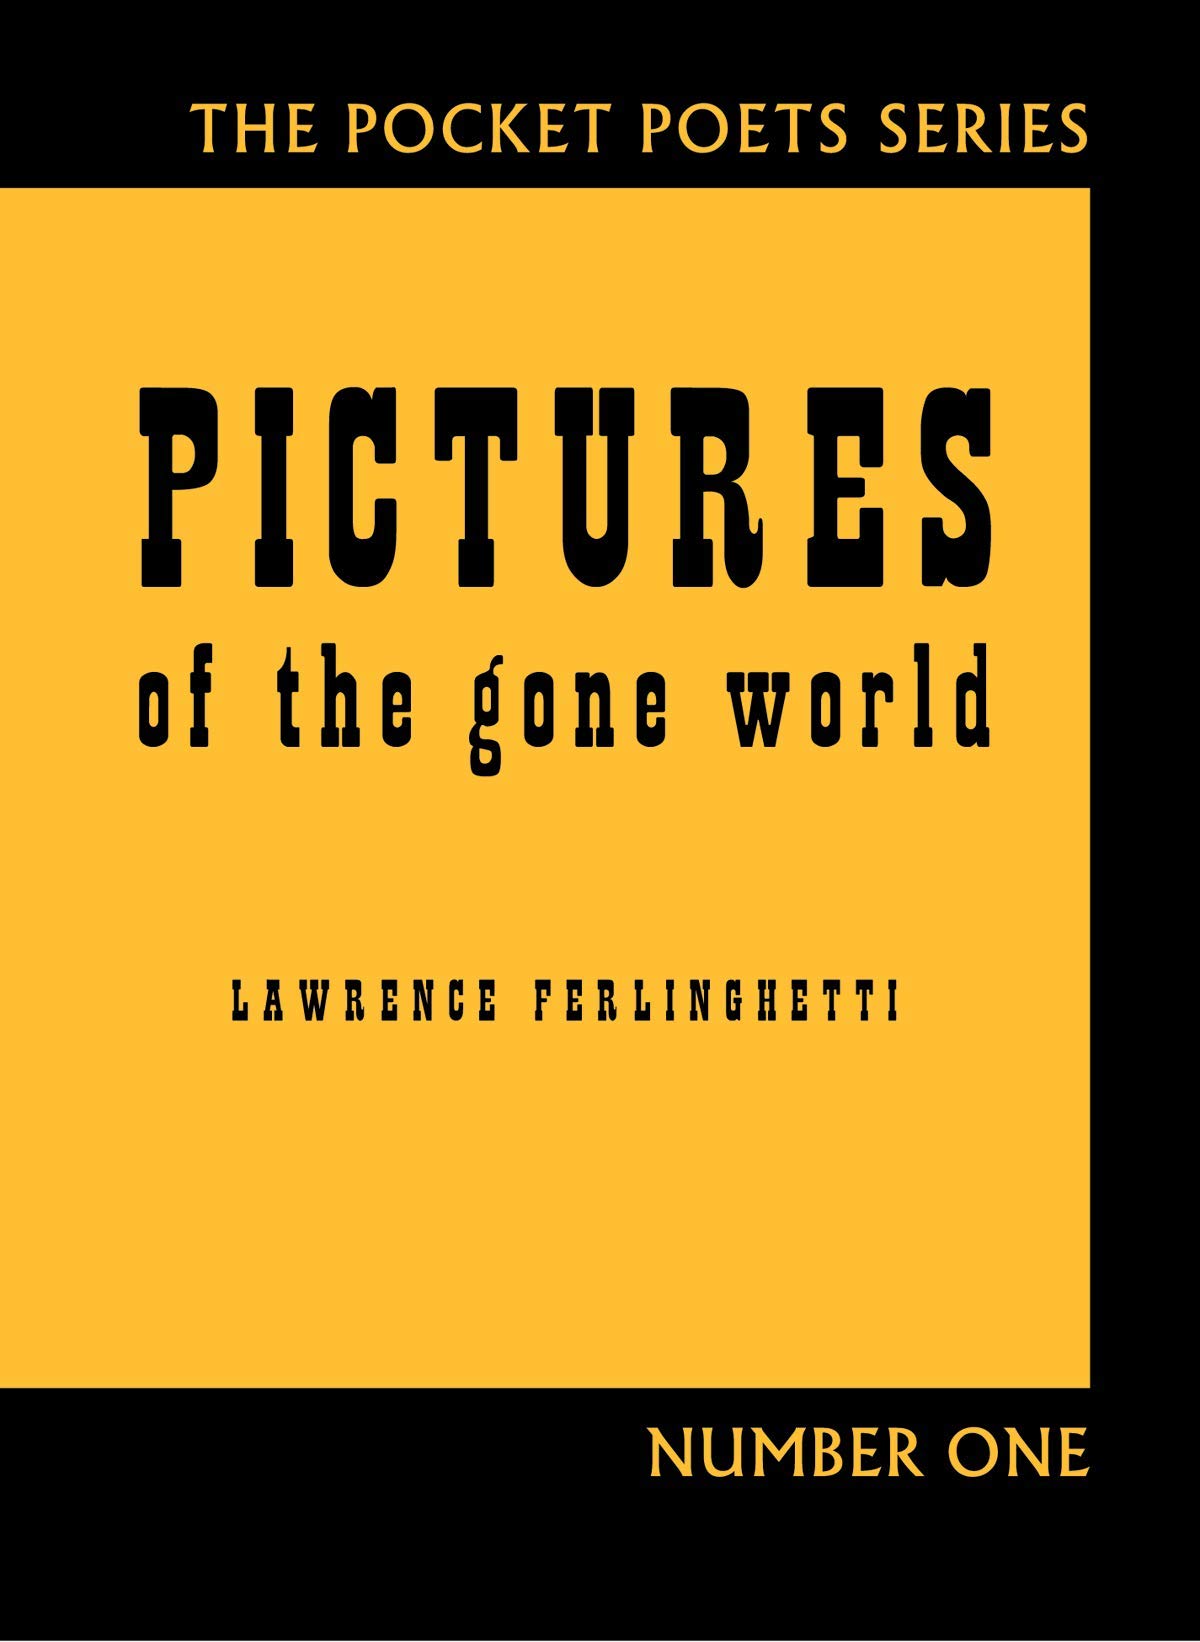 Pictures of the Gone World: 60th Anniversary Edition, by Lawrence Ferlighetti